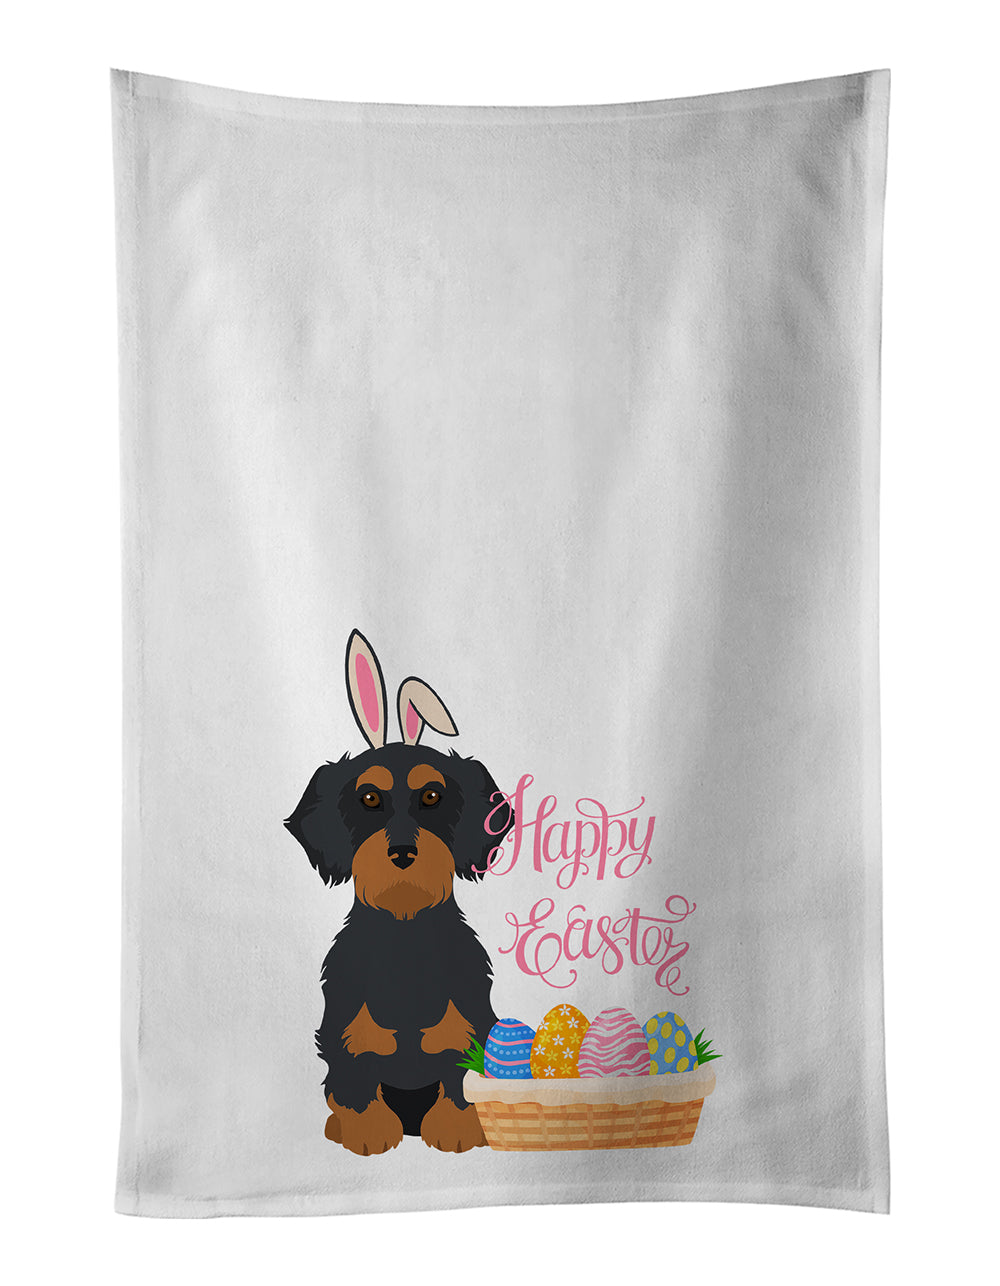 Buy this Wirehair Black and Tan Dachshund Easter White Kitchen Towel Set of 2 Dish Towels